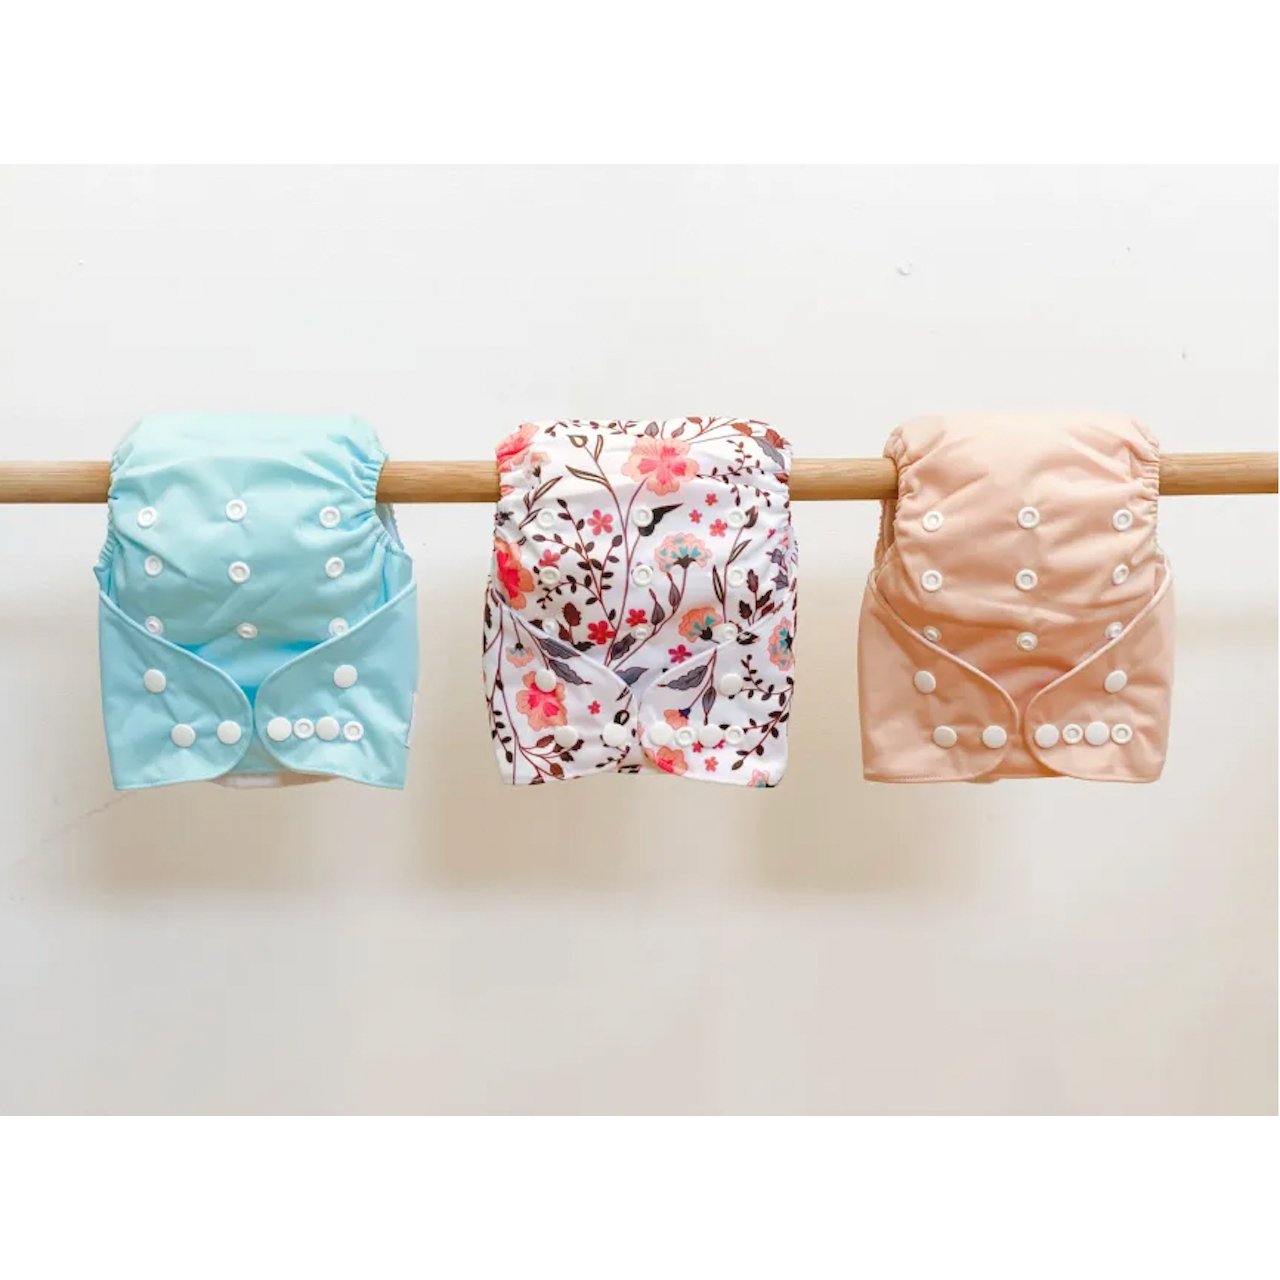 3 Cottontail Modern Cloth Nappy - Wild Flower Trio Pack - Little Kids Business